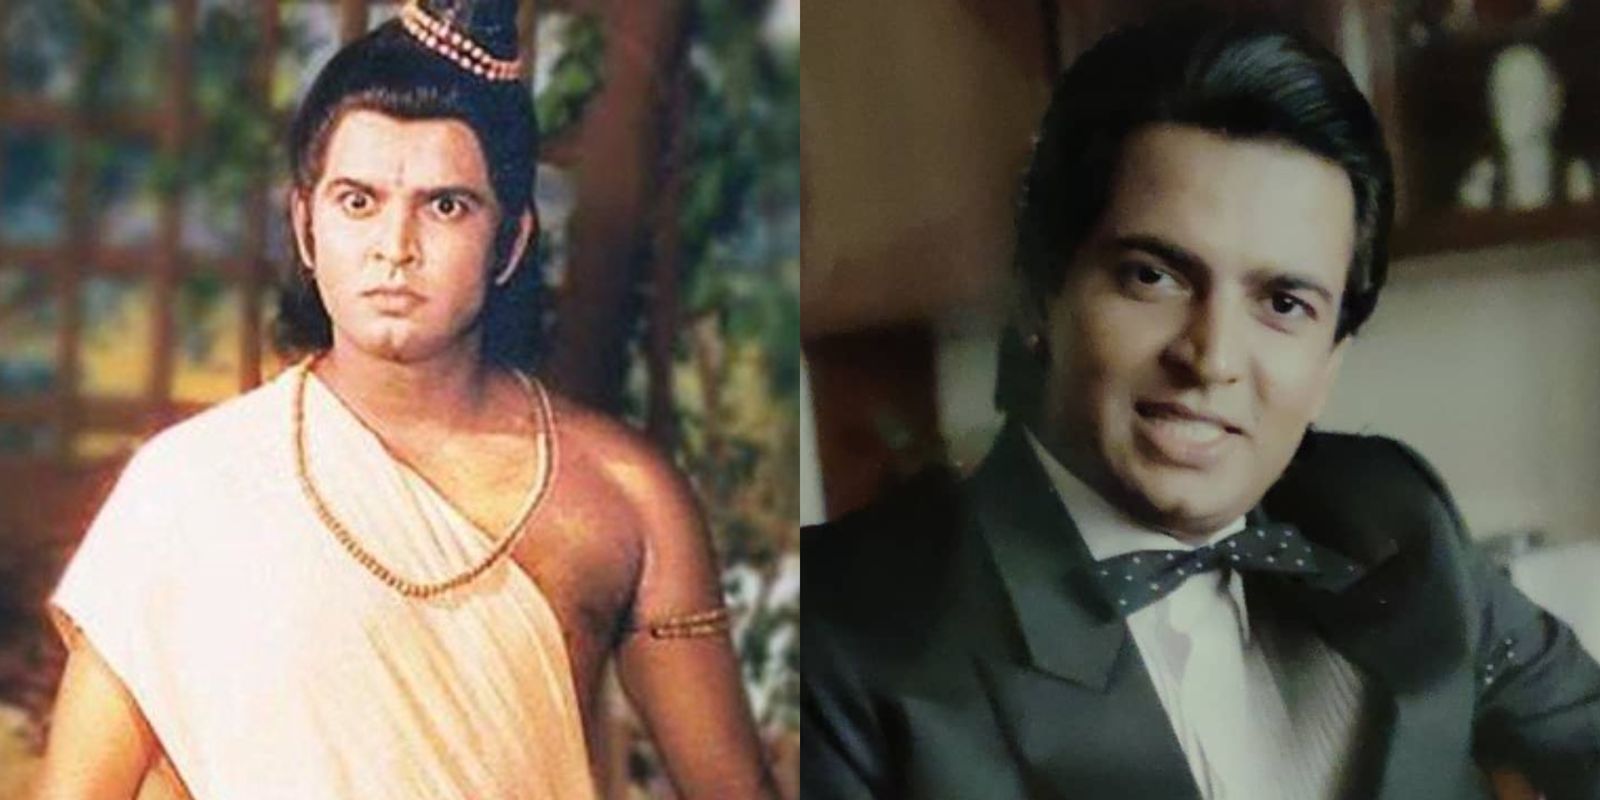 Ramayan Actor Sunil Lahri Opens Up About Being A ‘Youth Icon’ And ‘India’s Crush’